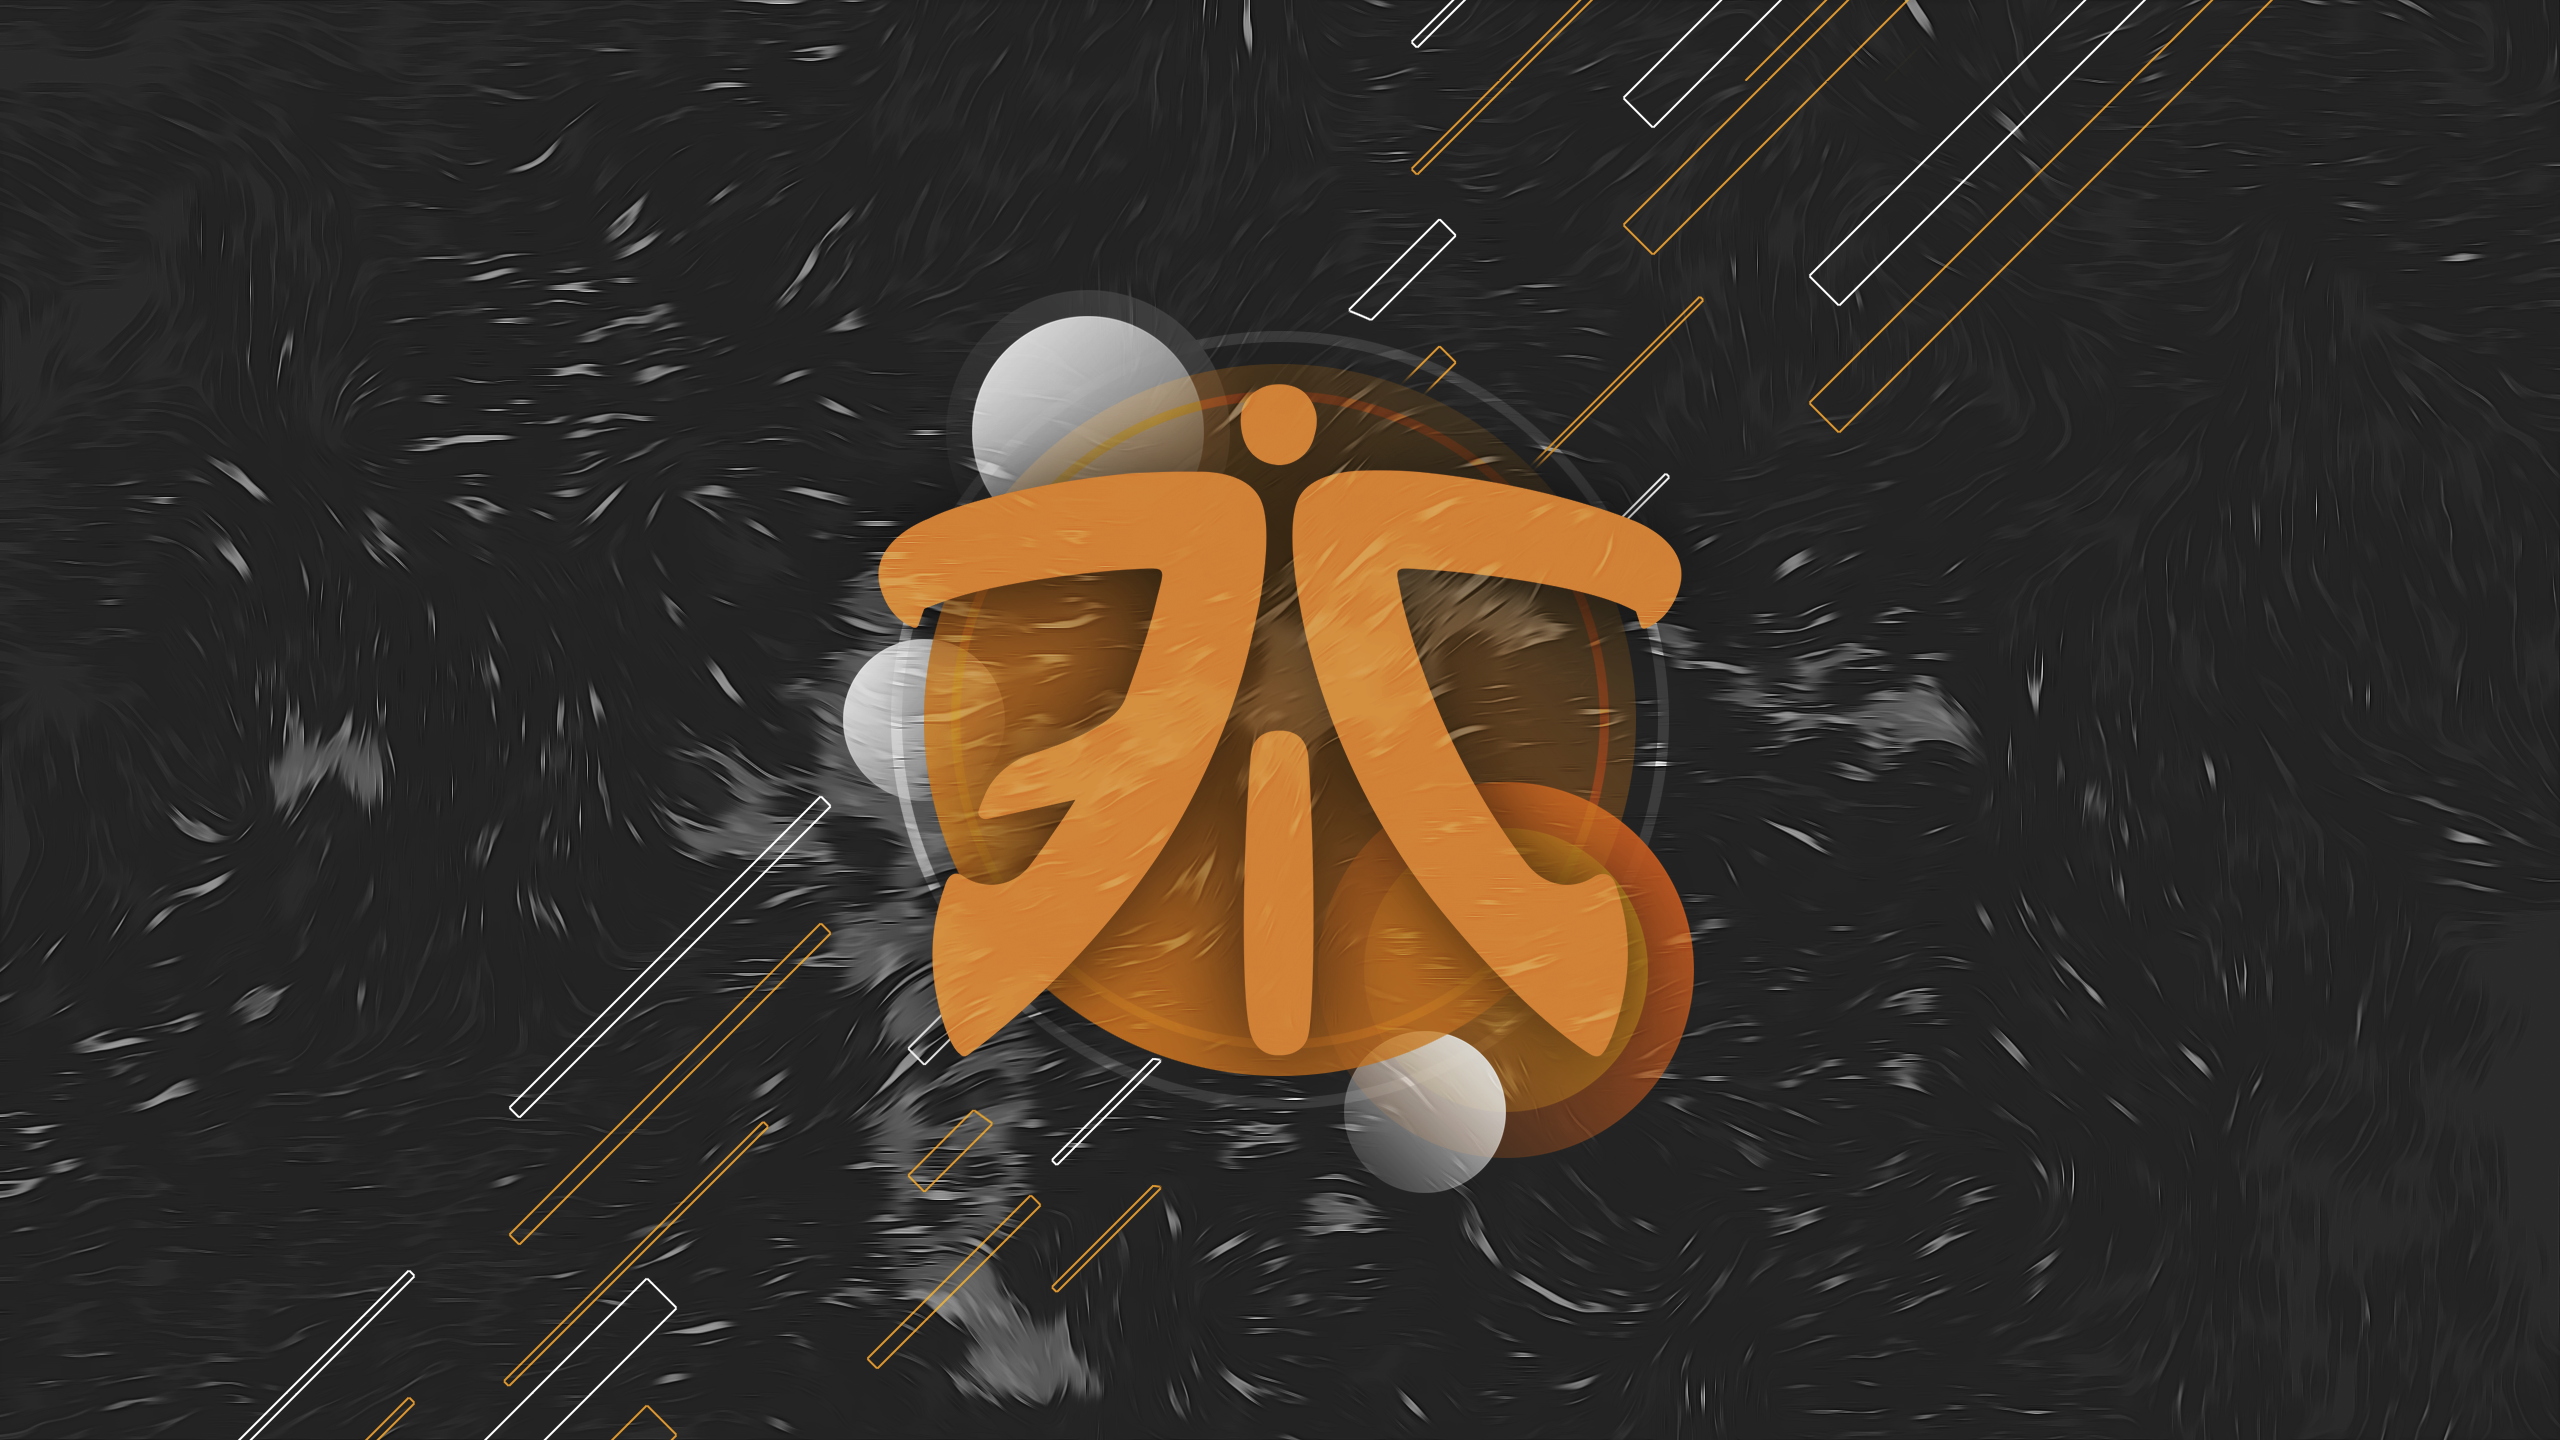 A Fresh Fnatic Wallpaper For All You Fans Out There - Illustration , HD Wallpaper & Backgrounds